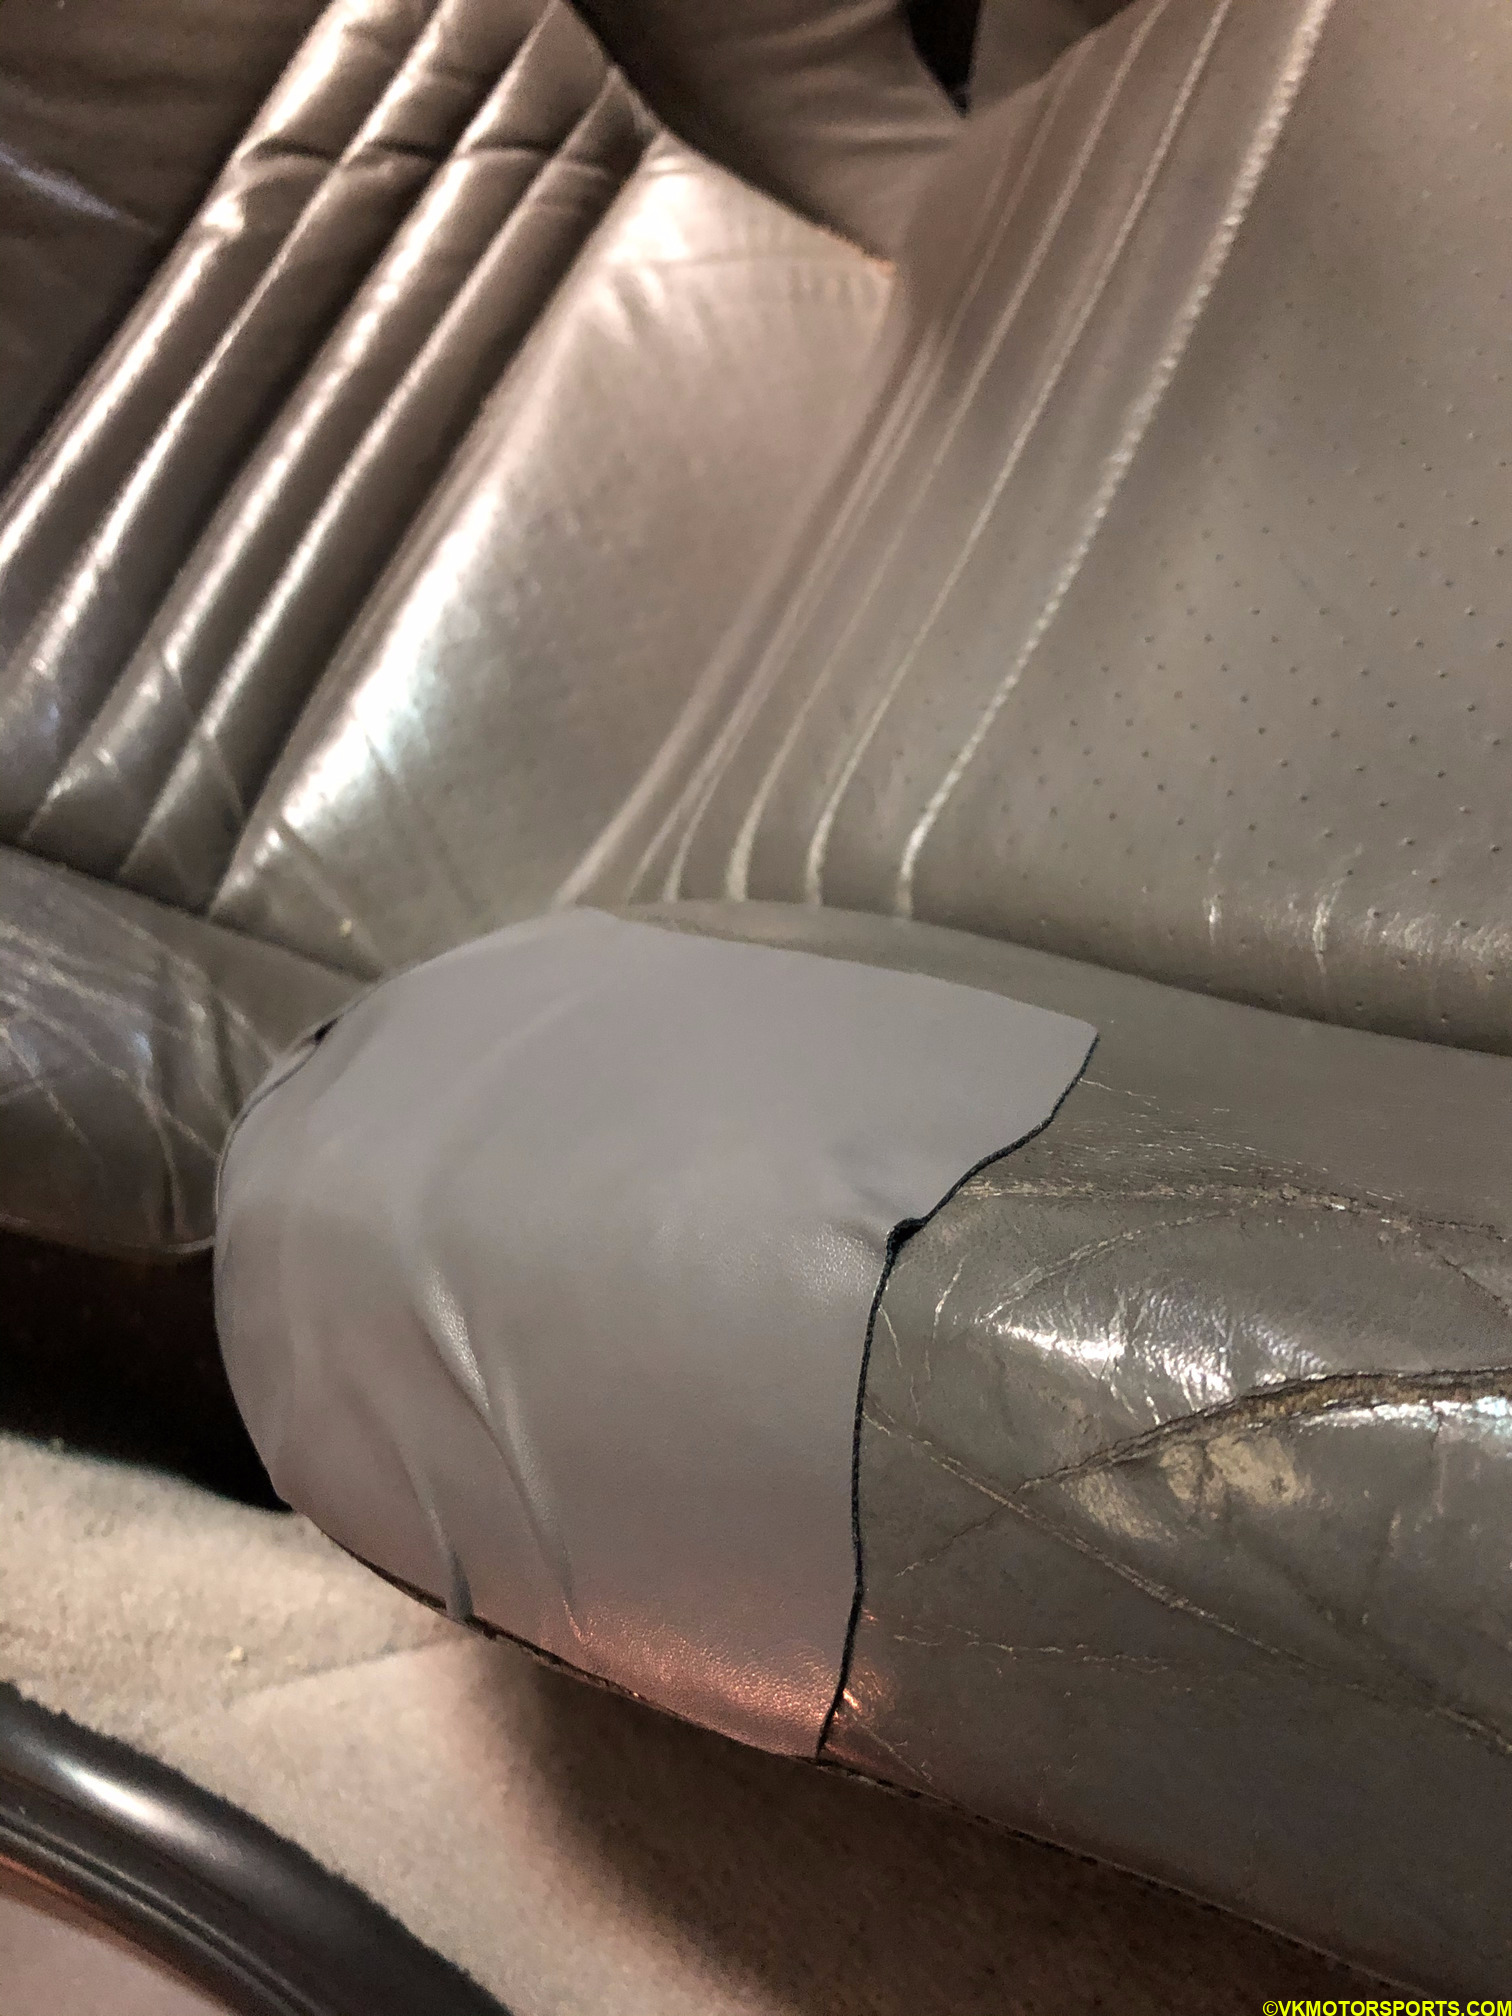 Figure 4. Driver's seat patched bolster